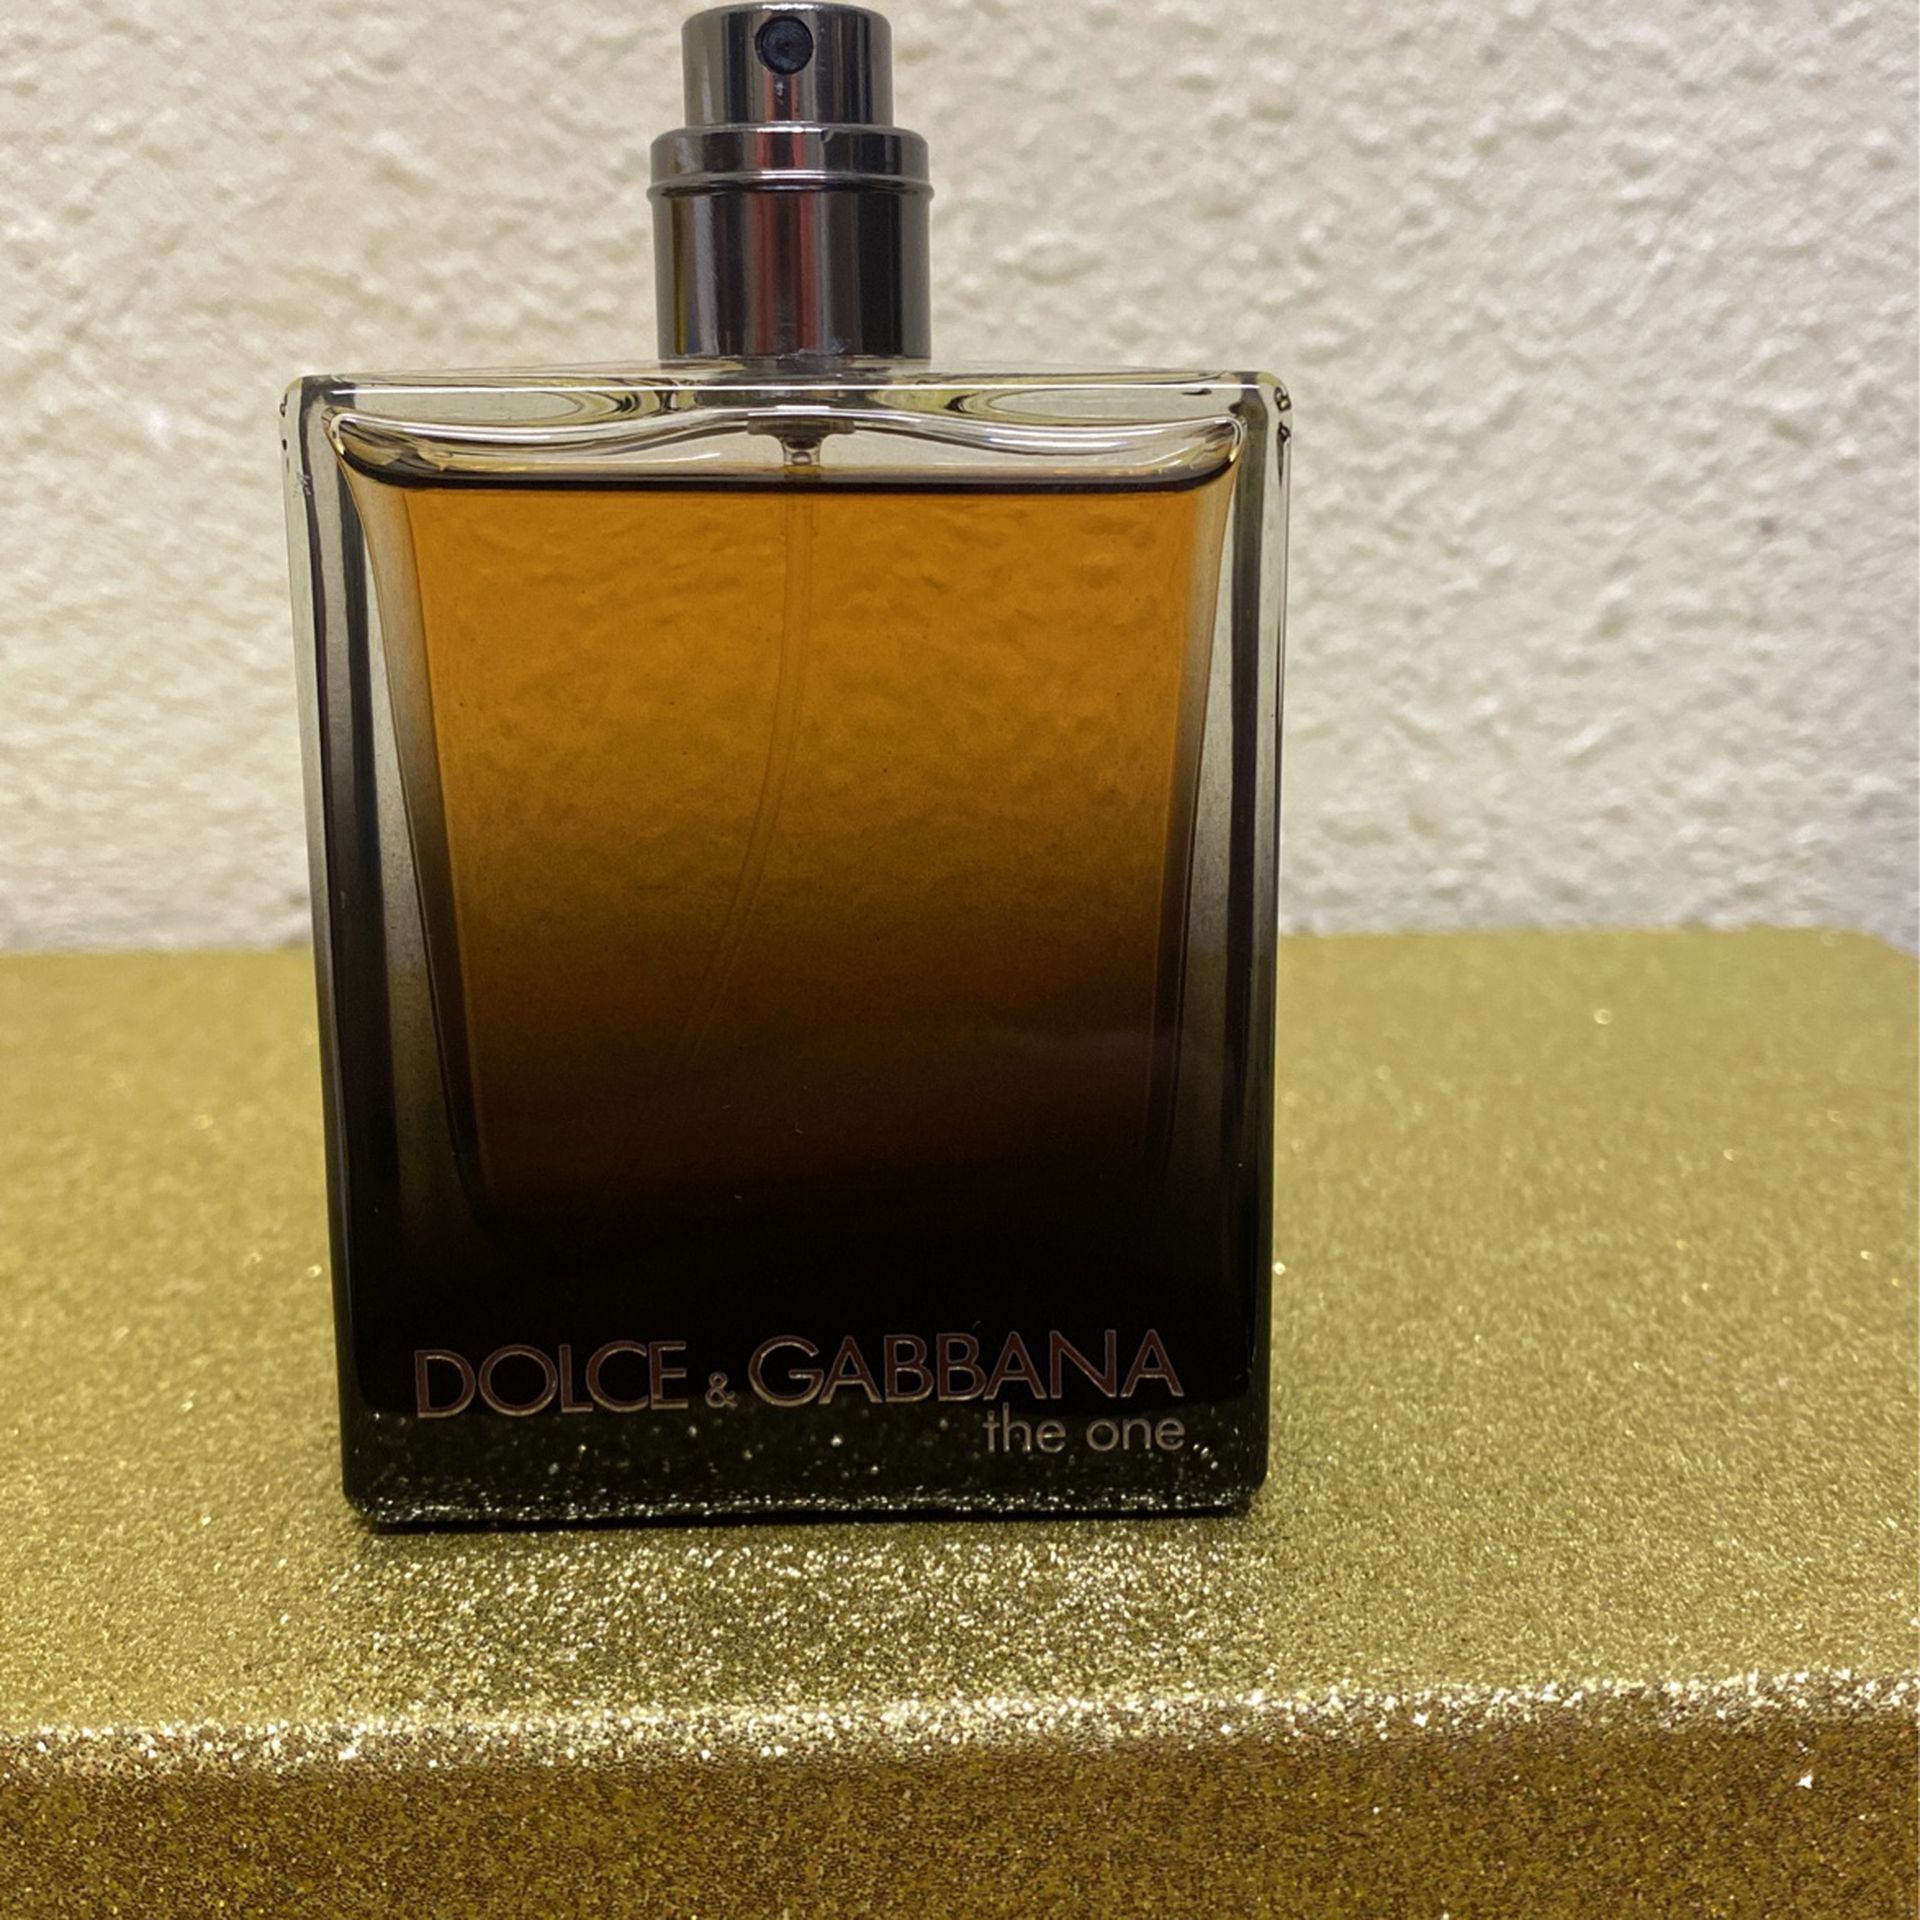 Dolce & Gabbana The One EDP. Cologne for Sale in Rancho